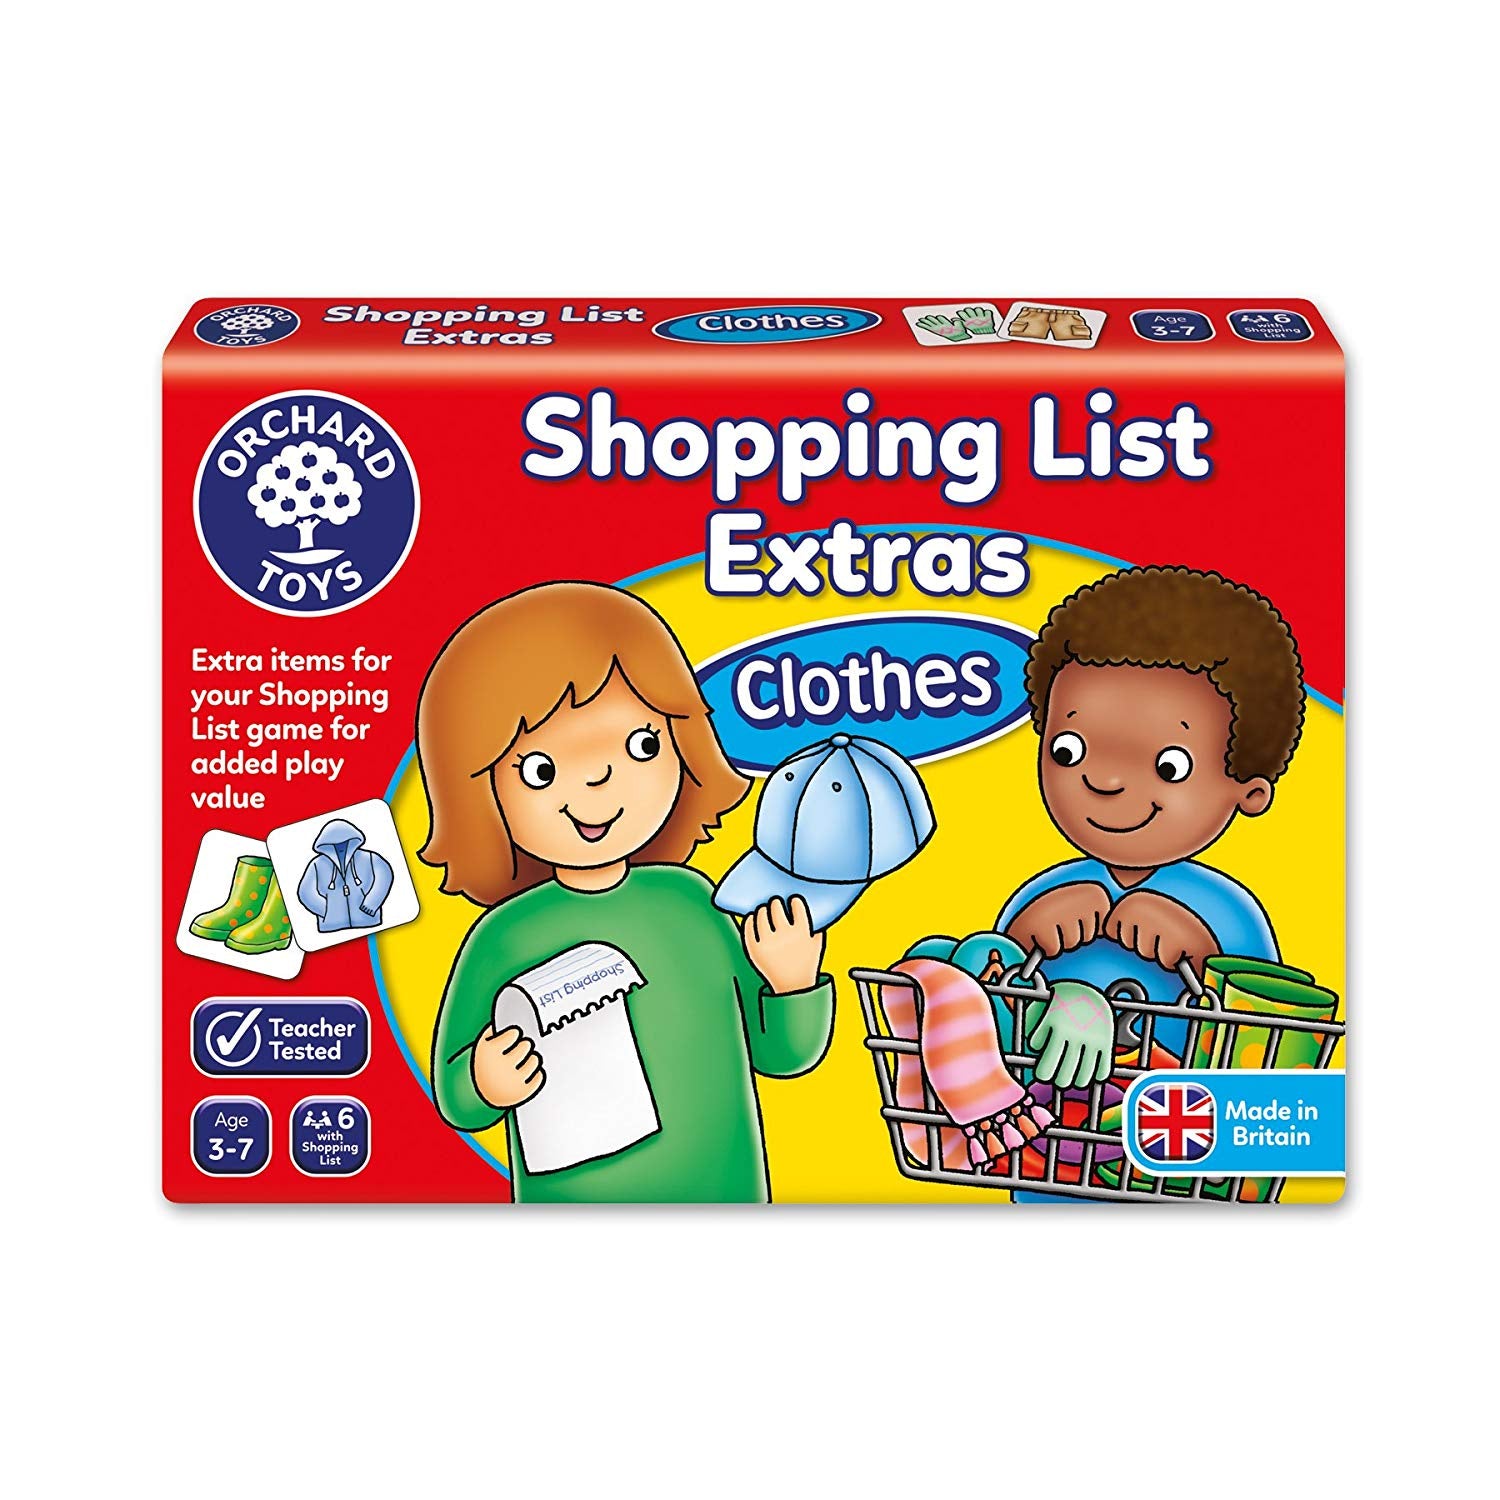 Orchard Toys Shopping List Extras - Clothes